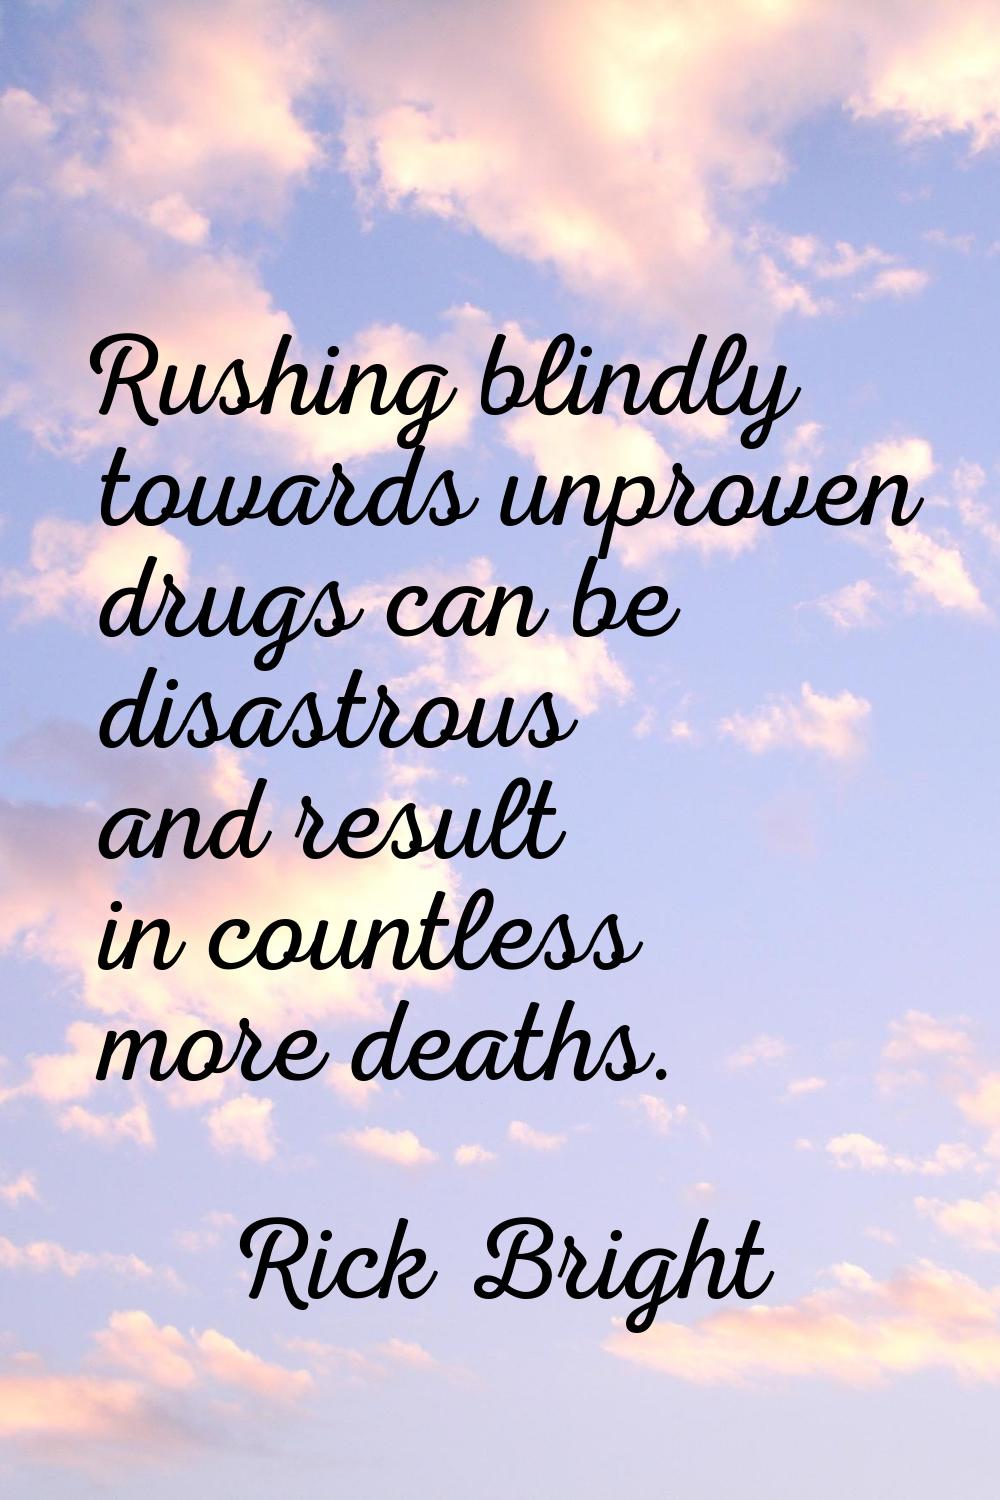 Rushing blindly towards unproven drugs can be disastrous and result in countless more deaths.